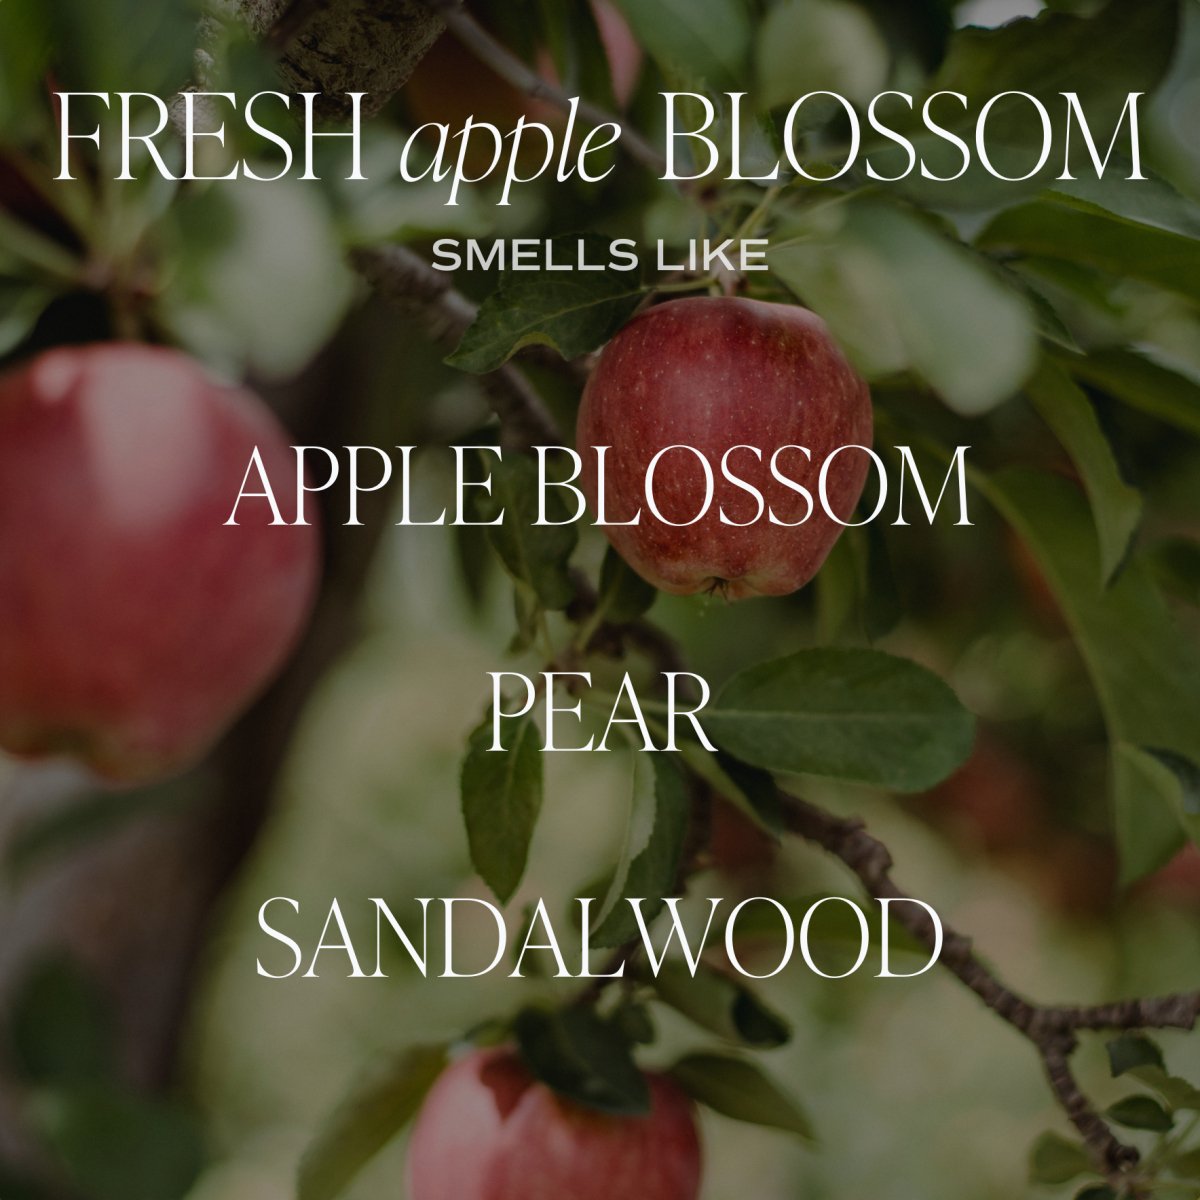 Load image into Gallery viewer, Sweet Water Decor Fresh Apple Blossom Soy Candle - Clear Jar - 9 oz - lily &amp;amp; onyx
